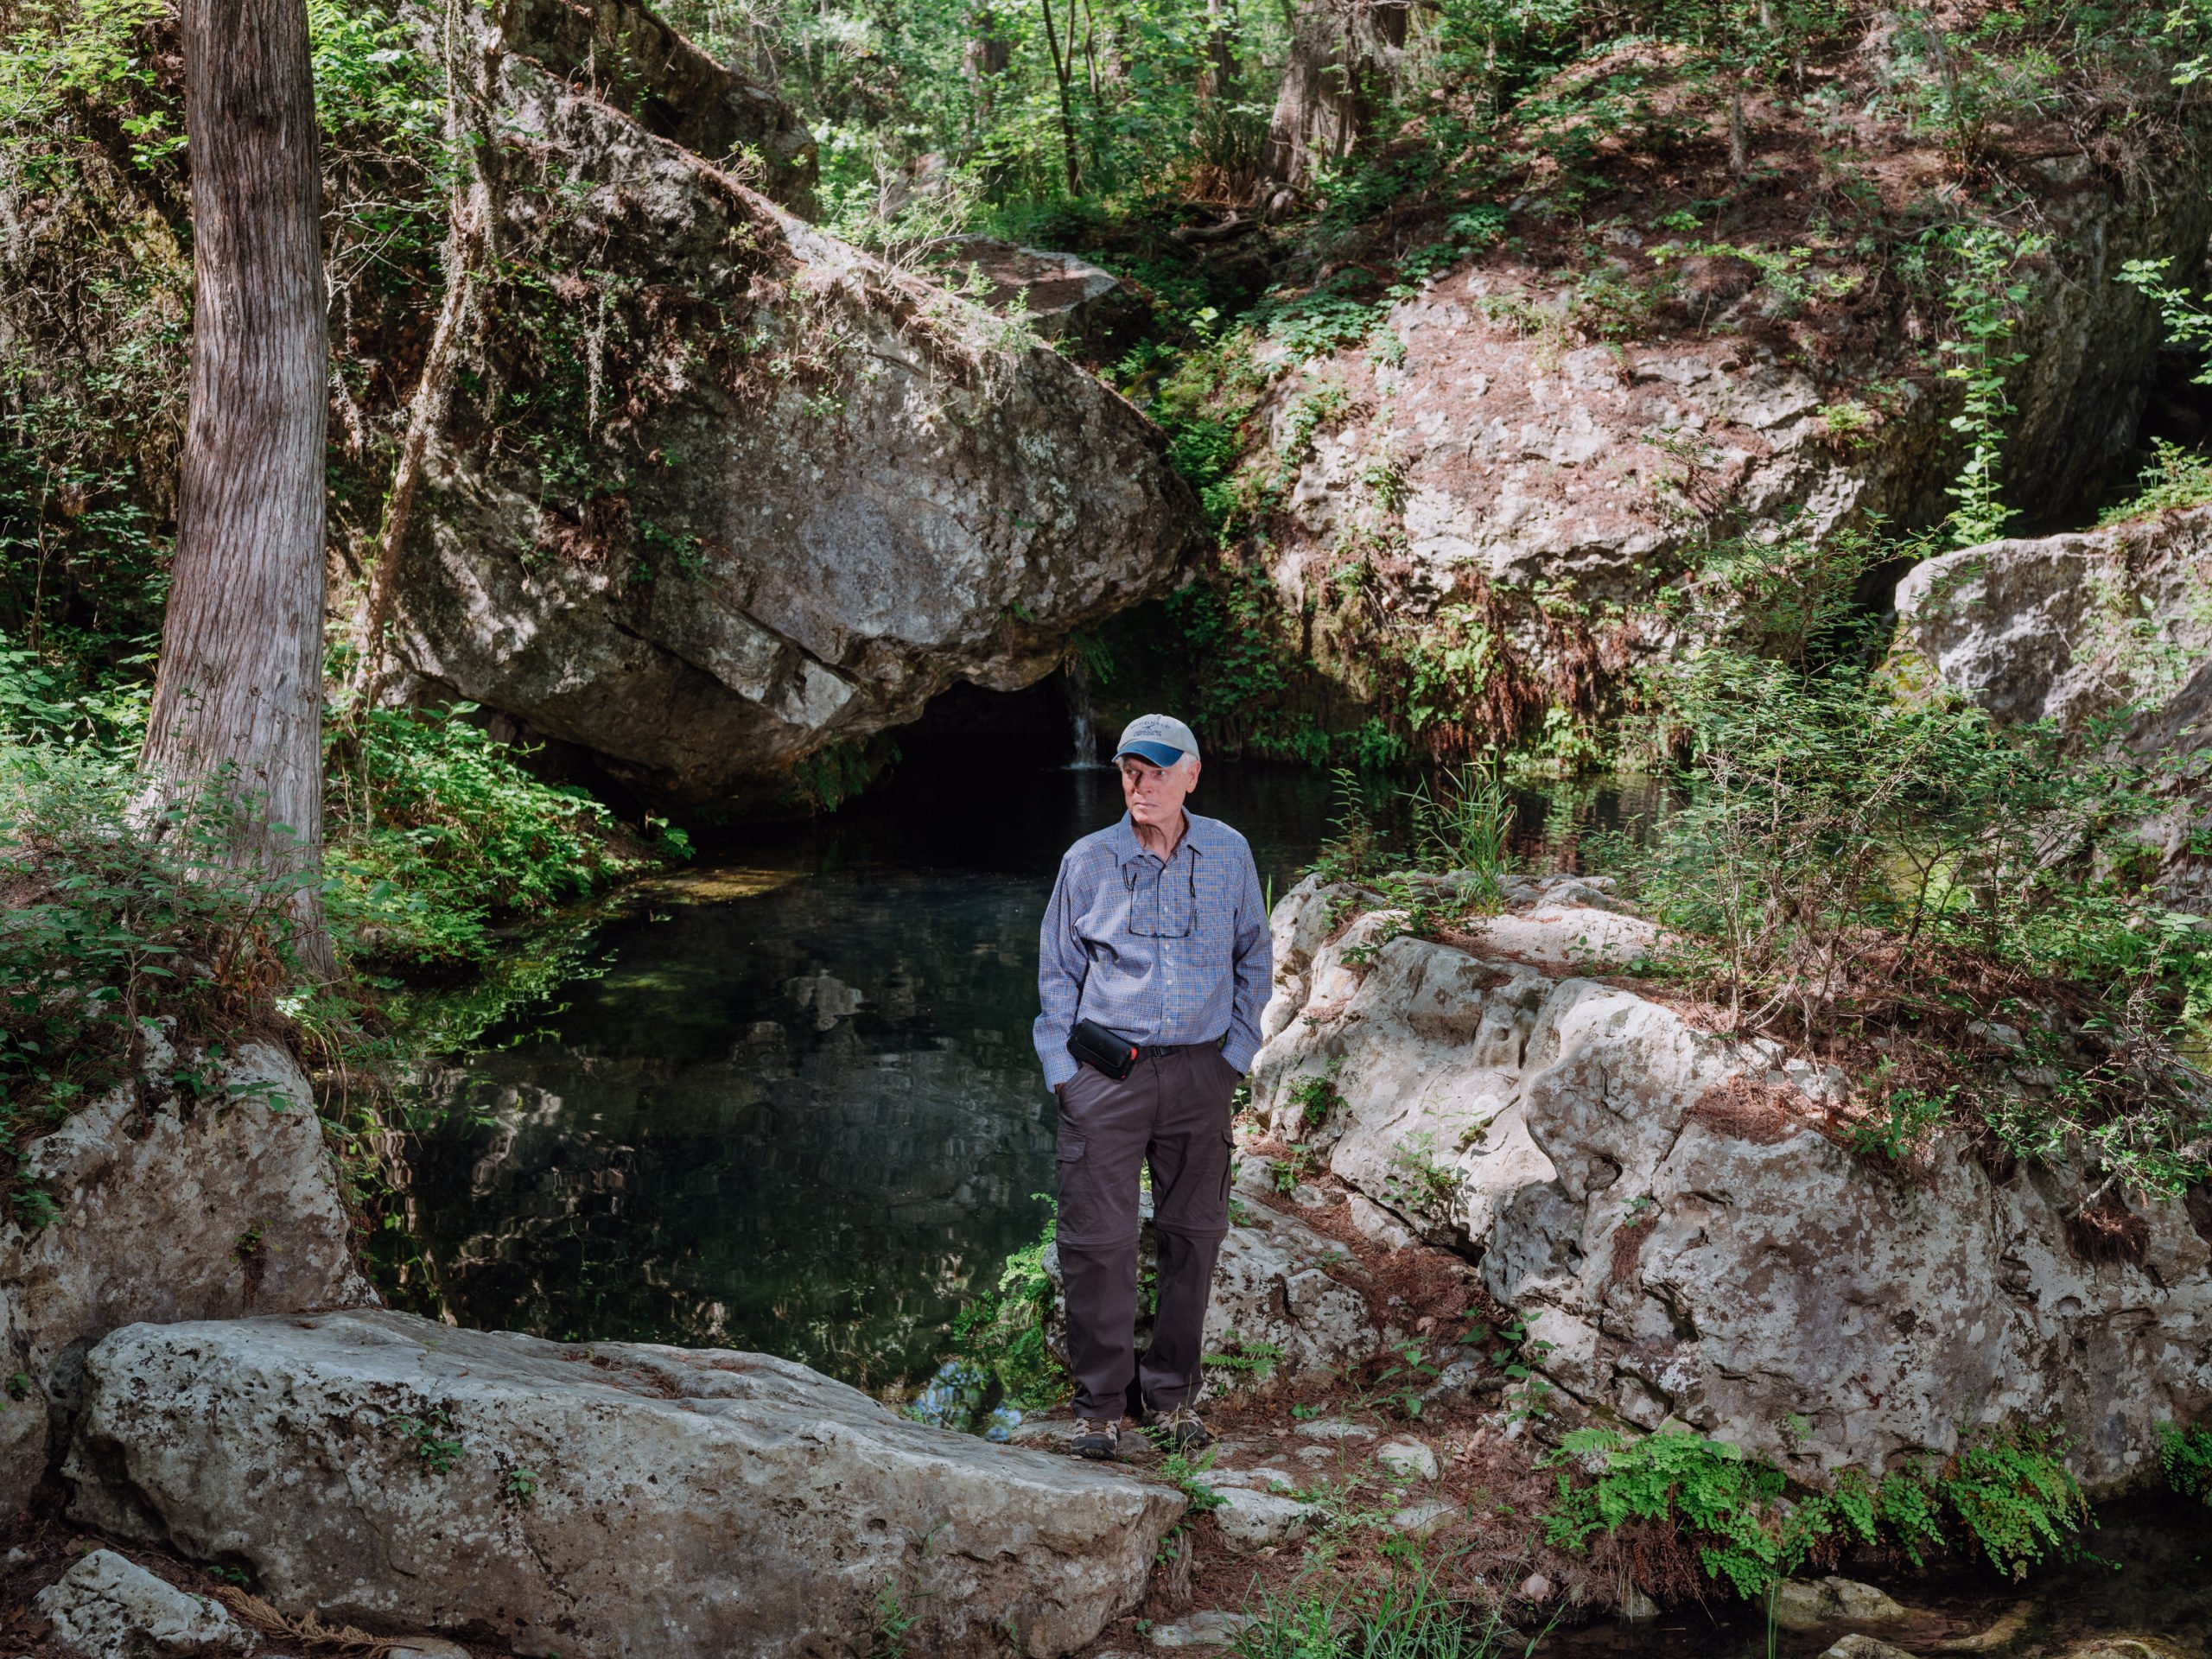 Lew Adams, an older man in a ballcap, denim shirt and dark slacks, stands among natural splendor at a small spring surrounded by a cave and green foliage.